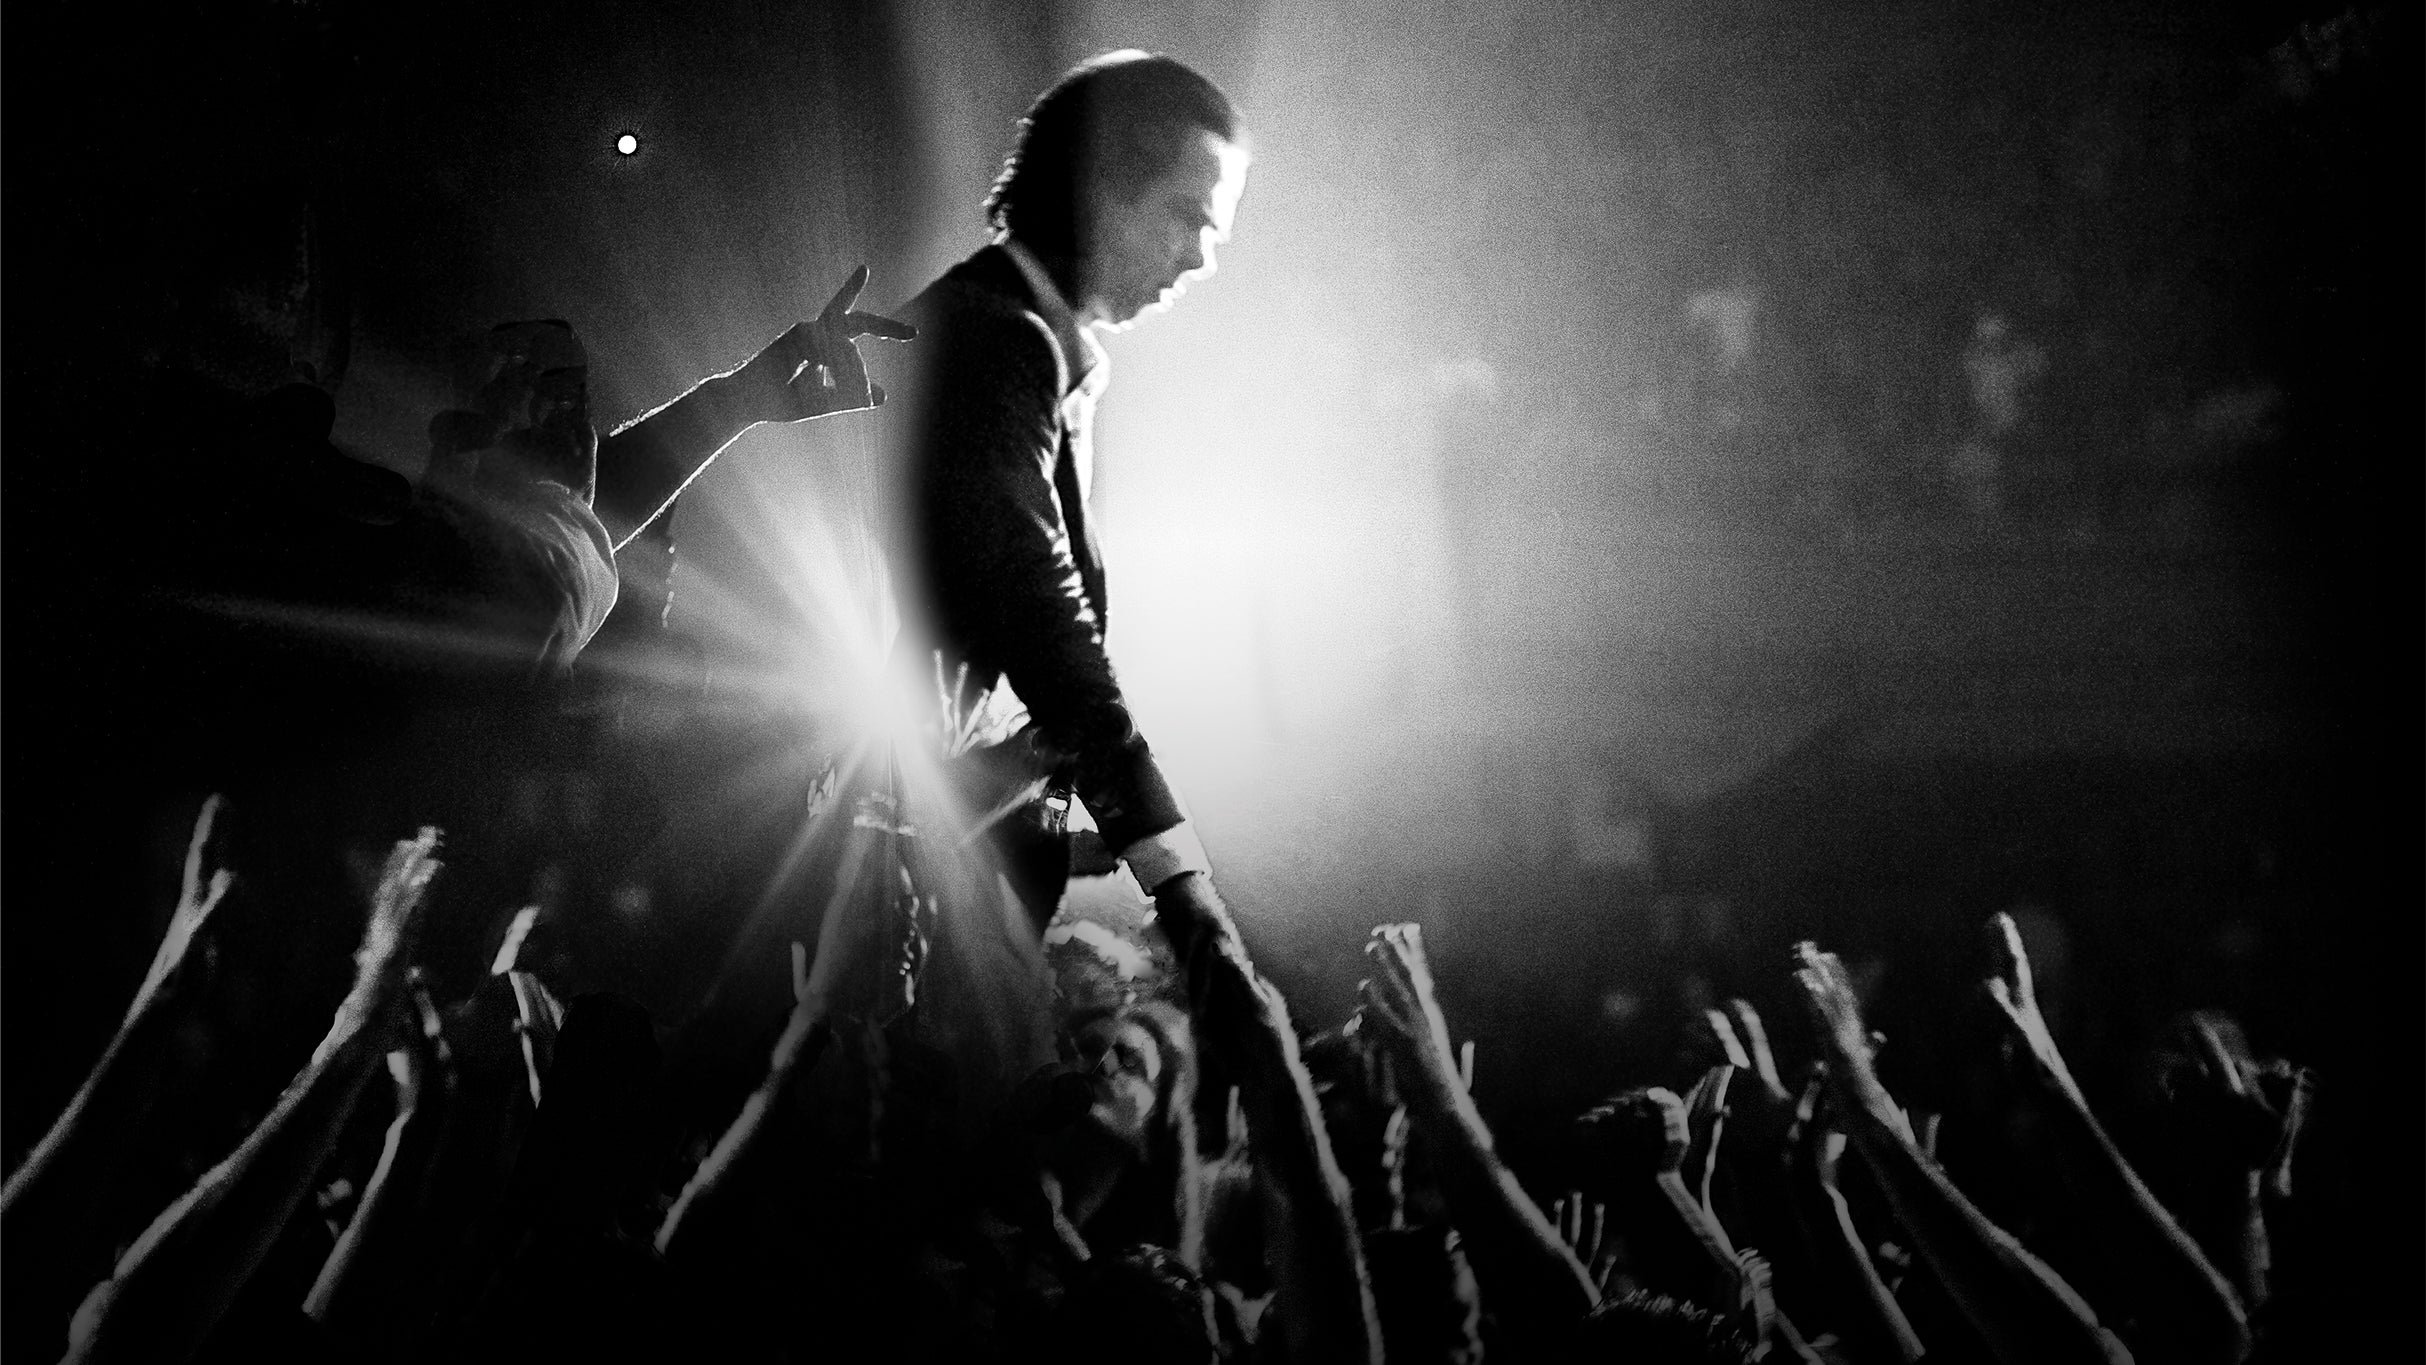 Nick Cave & the Bad Seeds : The Wild God Tour in Glasgow promo photo for Venue presale offer code